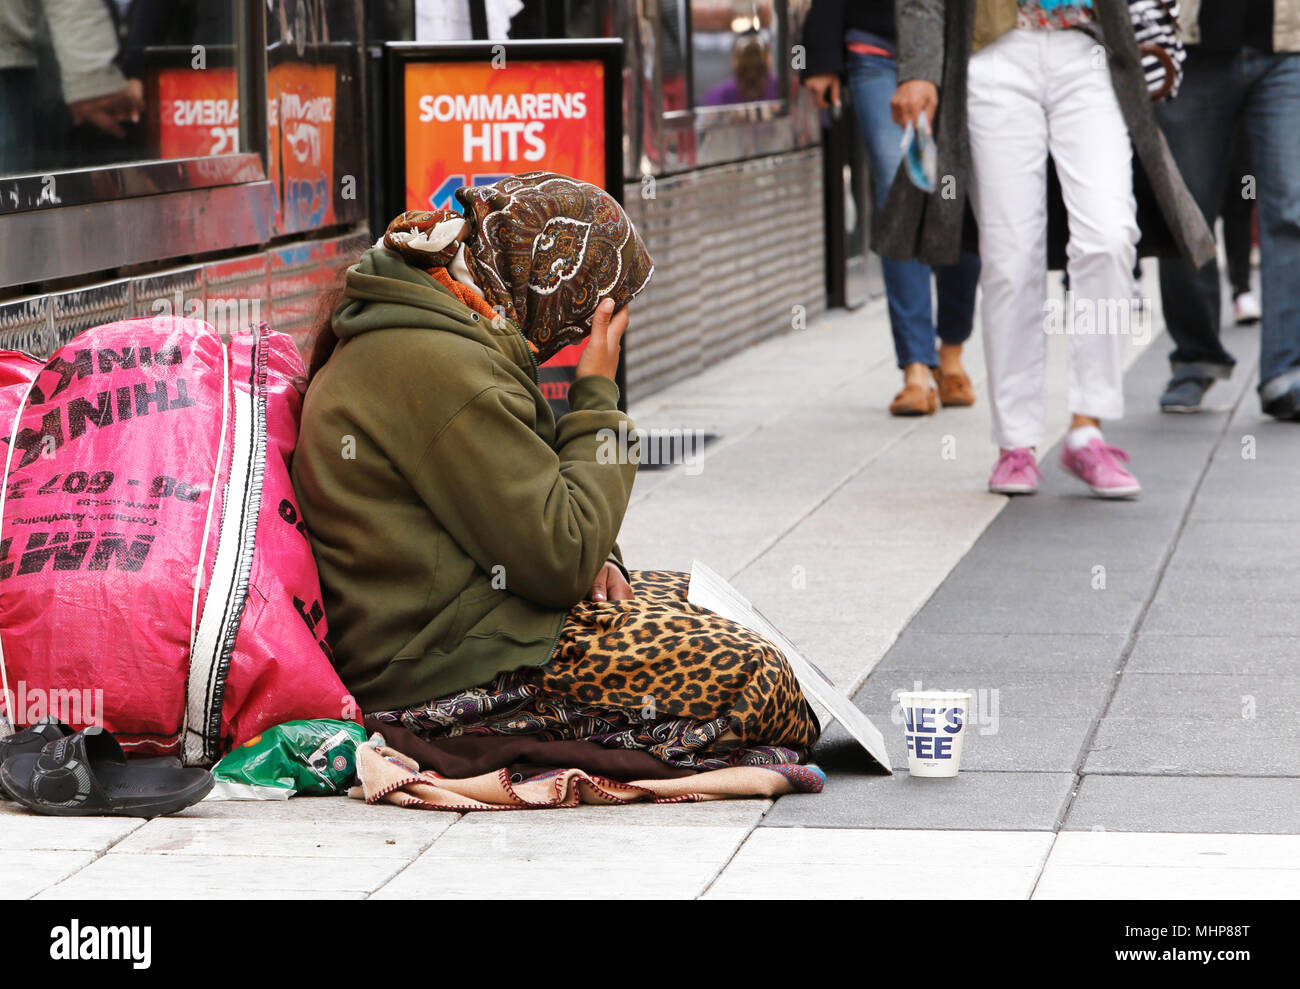 Stockholm, Sweden - June 24, 2014: An unknown woman sits quietly and asking for money with a mug in front of her on Drottninggatan. Stock Photo